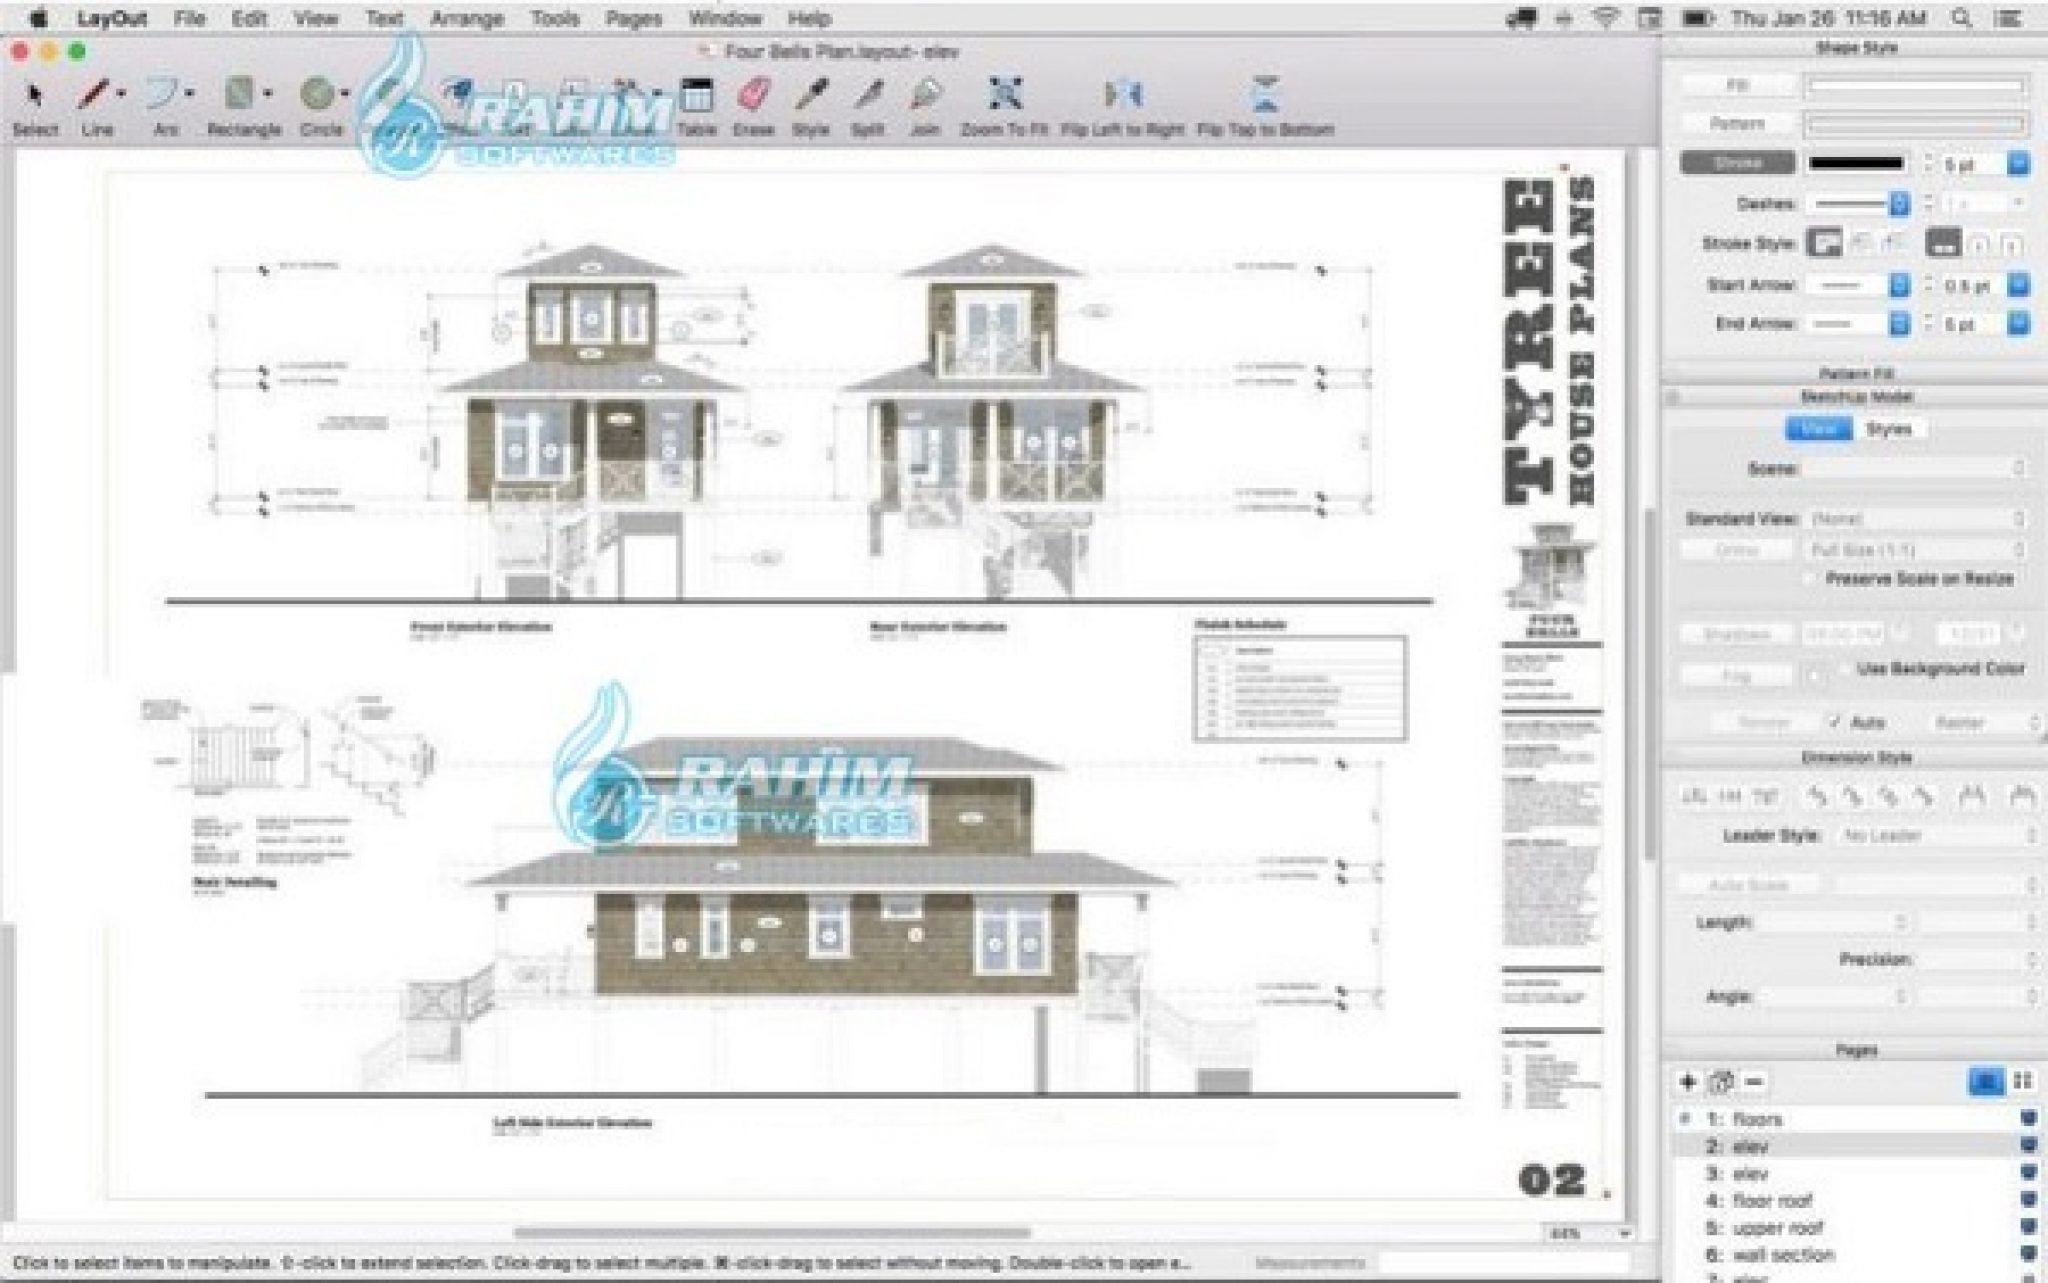 cost of sketchup pro